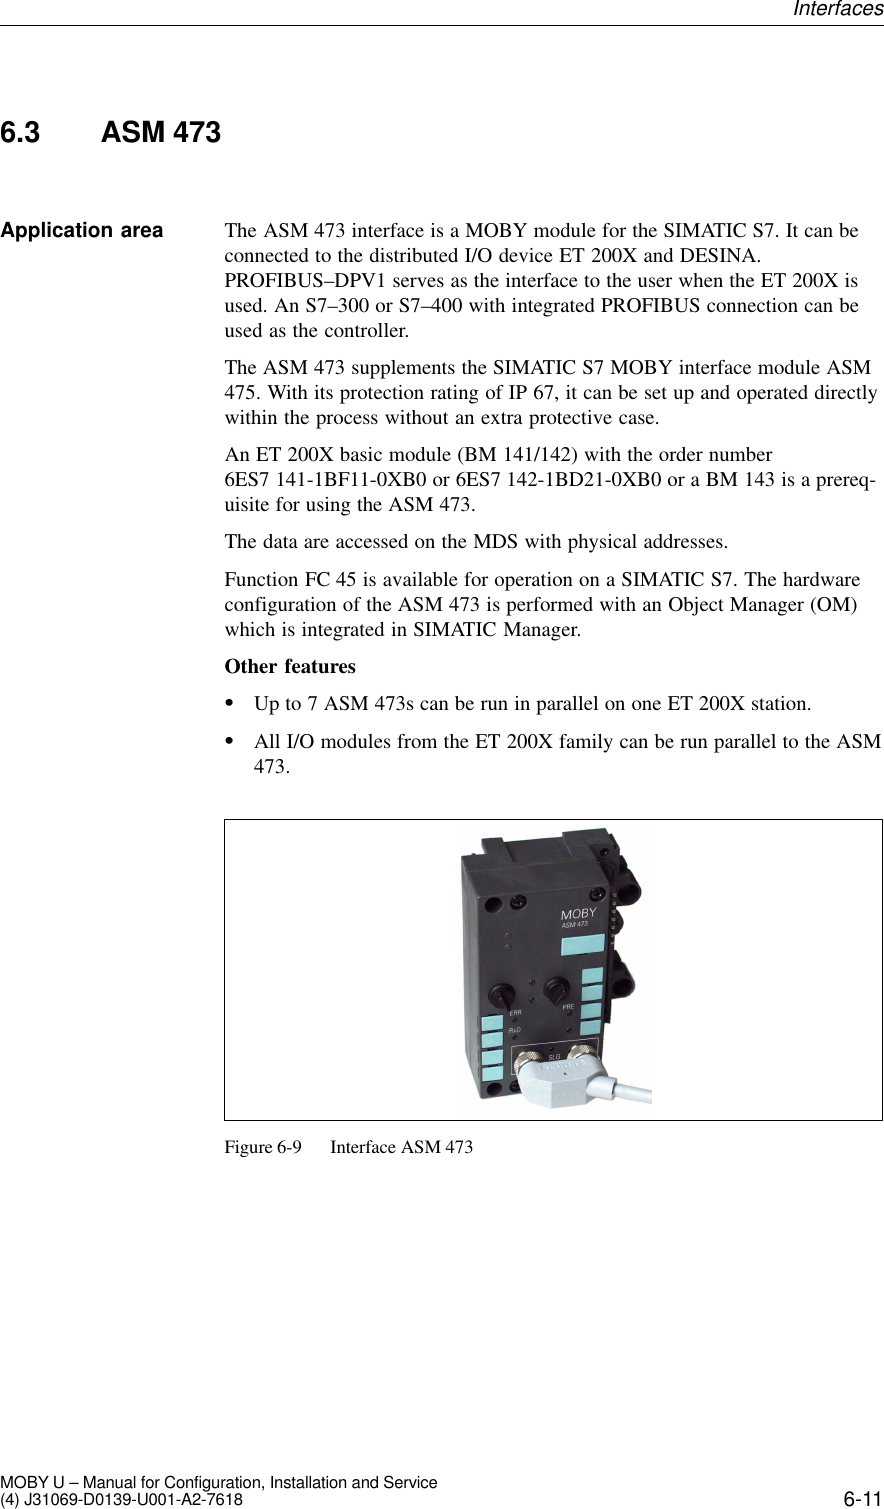 6-11MOBY U – Manual for Configuration, Installation and Service(4) J31069-D0139-U001-A2-76186.3 ASM 473The ASM 473 interface is a MOBY module for the SIMATIC S7. It can beconnected to the distributed I/O device ET 200X and DESINA.PROFIBUS–DPV1 serves as the interface to the user when the ET 200X isused. An S7–300 or S7–400 with integrated PROFIBUS connection can beused as the controller.The ASM 473 supplements the SIMATIC S7 MOBY interface module ASM475. With its protection rating of IP 67, it can be set up and operated directlywithin the process without an extra protective case.An ET 200X basic module (BM 141/142) with the order number6ES7 141-1BF11-0XB0 or 6ES7 142-1BD21-0XB0 or a BM 143 is a prereq-uisite for using the ASM 473.The data are accessed on the MDS with physical addresses.Function FC 45 is available for operation on a SIMATIC S7. The hardwareconfiguration of the ASM 473 is performed with an Object Manager (OM)which is integrated in SIMATIC Manager.Other featuresSUp to 7 ASM 473s can be run in parallel on one ET 200X station.SAll I/O modules from the ET 200X family can be run parallel to the ASM473.Figure 6-9 Interface ASM 473Application areaInterfaces